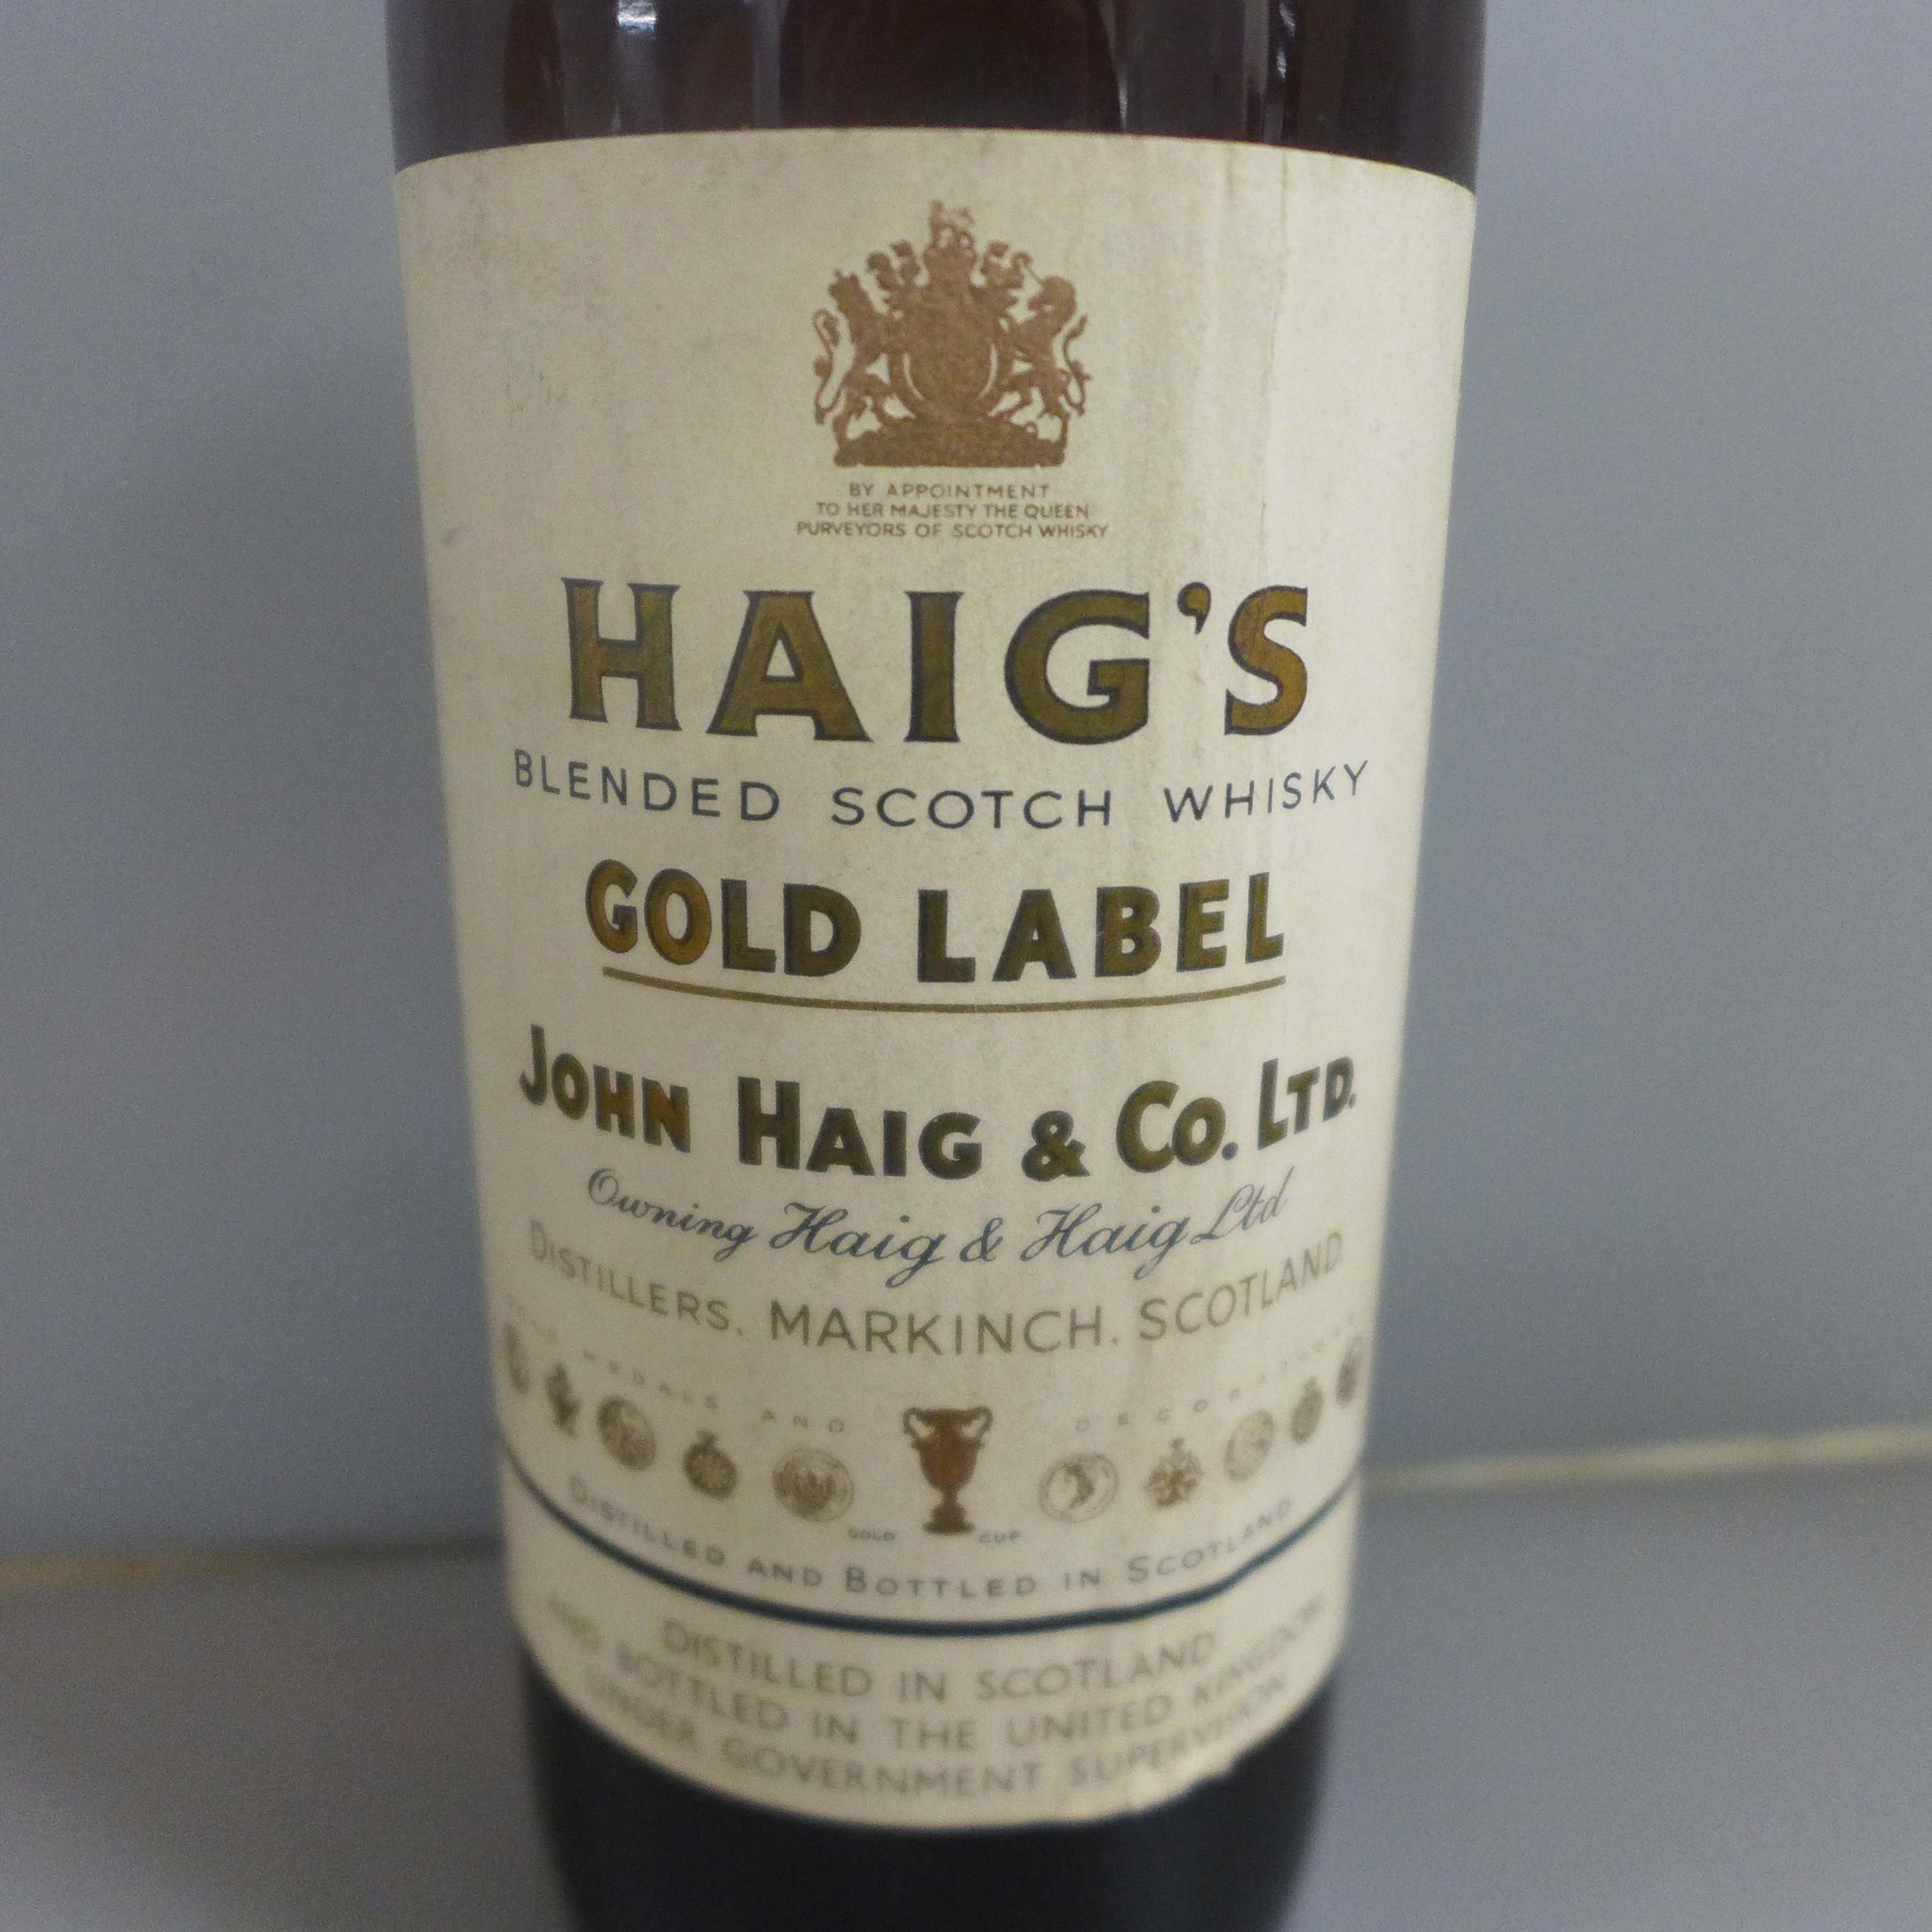 A Haig's Gold Label bottle of whisky - Image 2 of 3